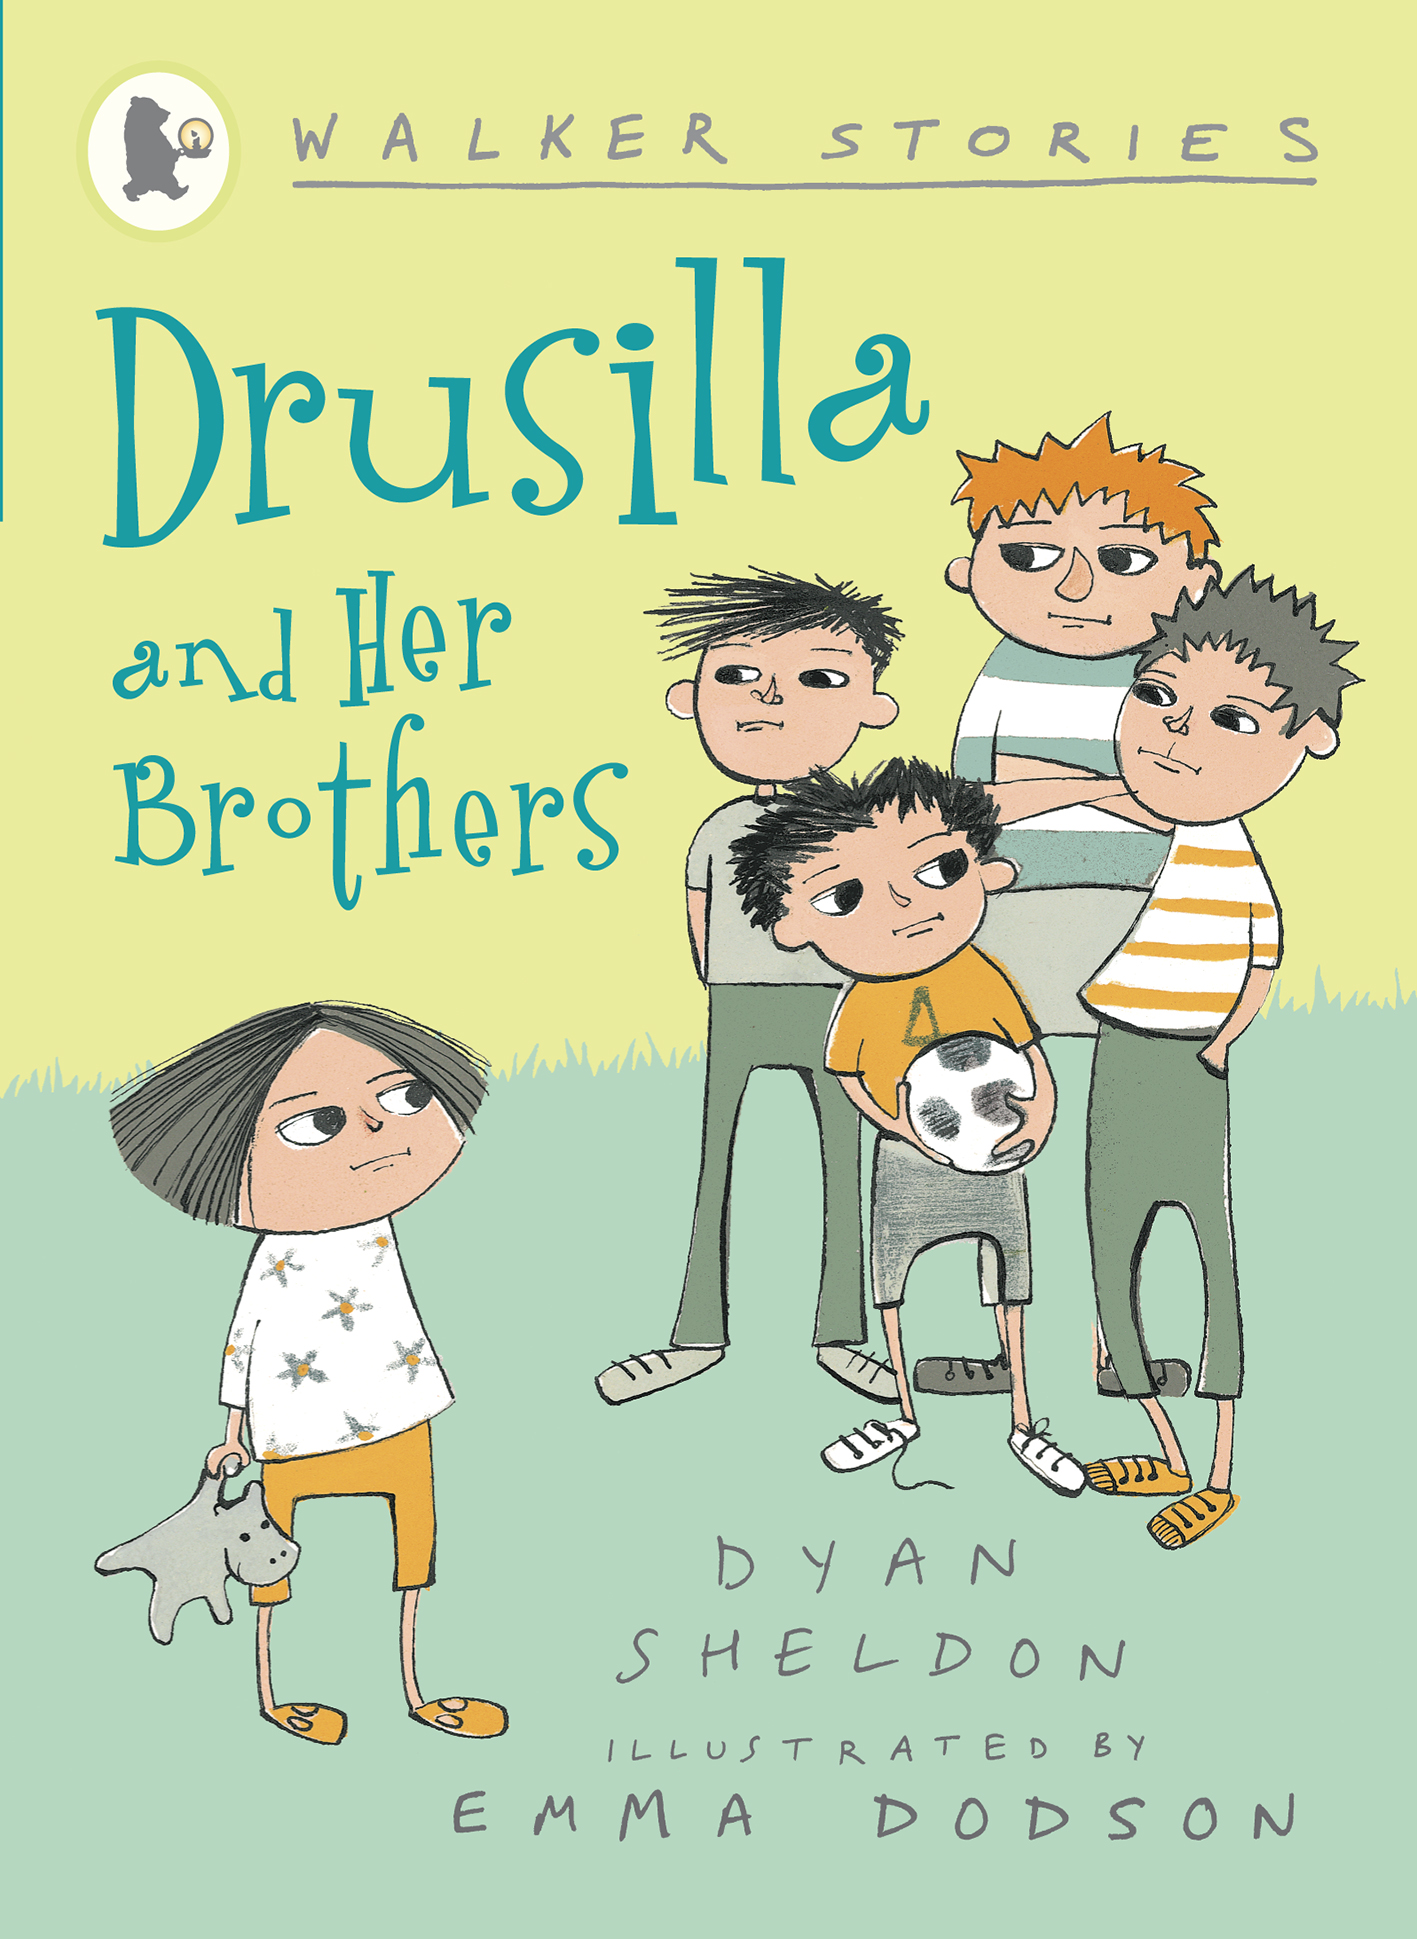 Drusilla-and-Her-Brothers